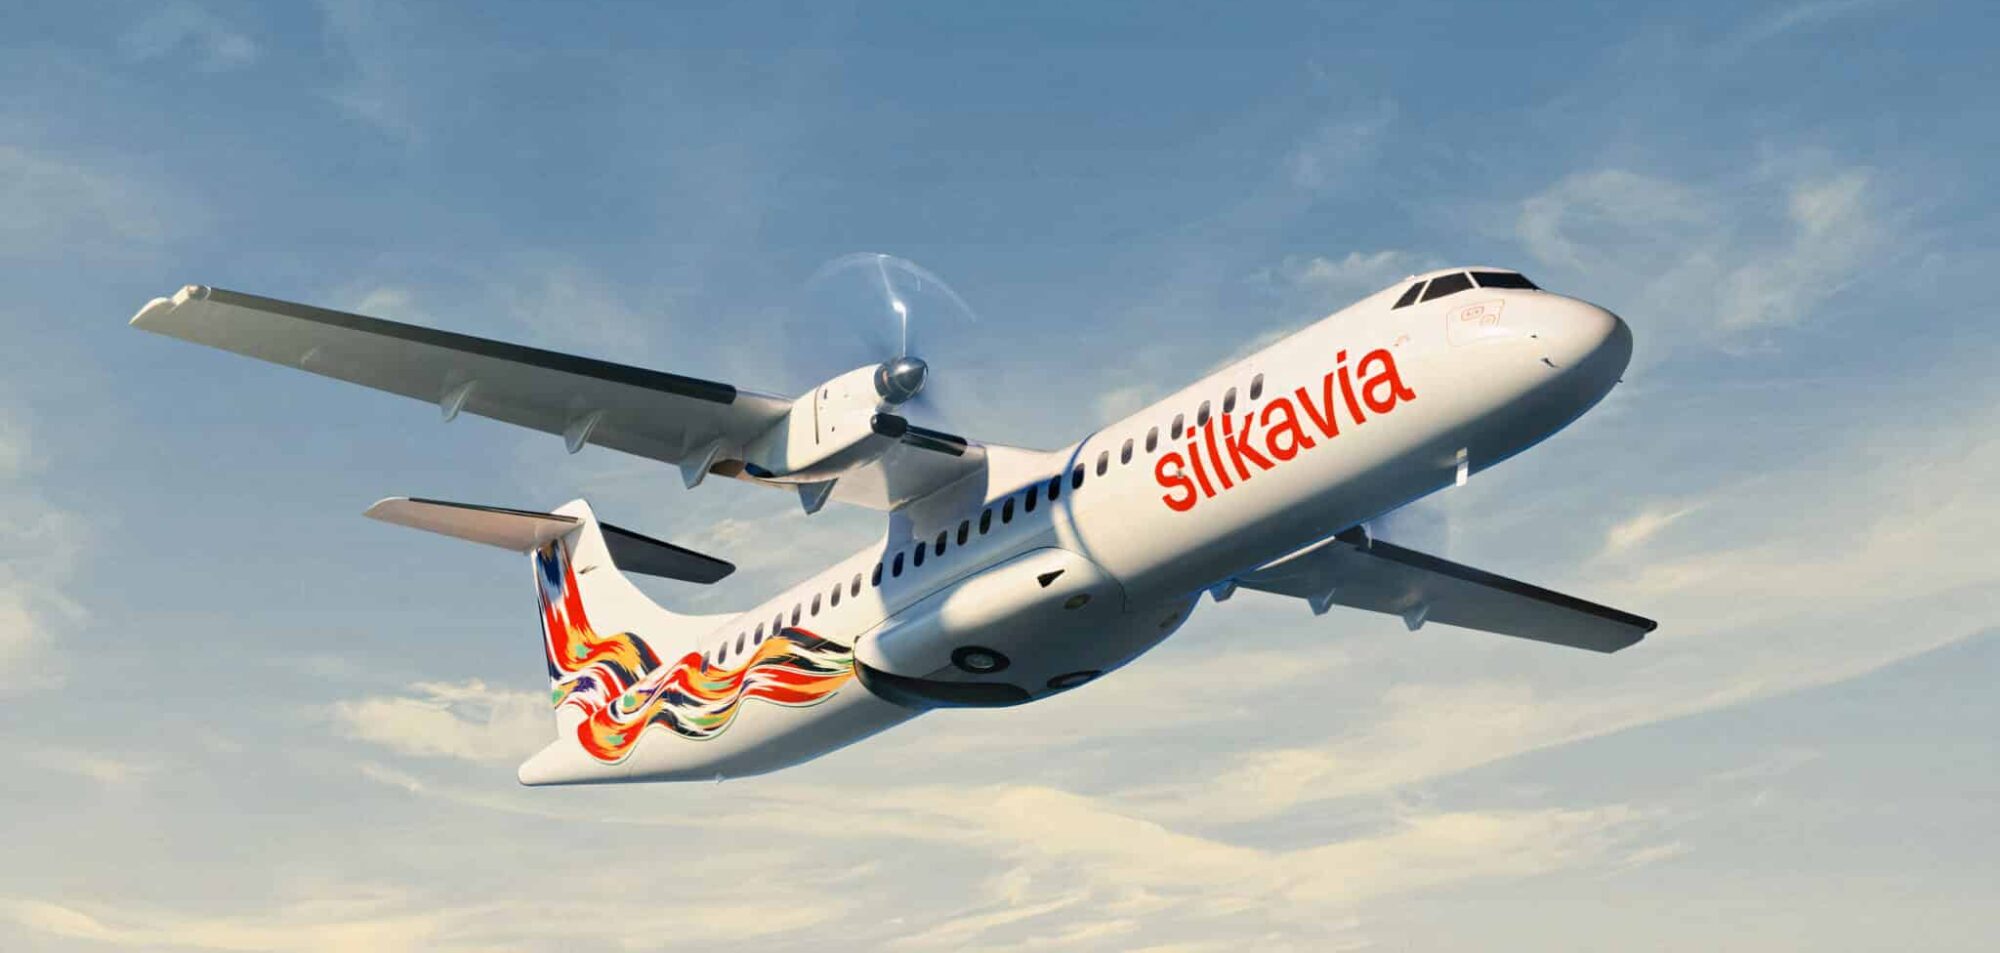 Nordic Aviation Capital delivers first ATR 72-600 to Silk Avia in a groundbreaking move for Central Asia